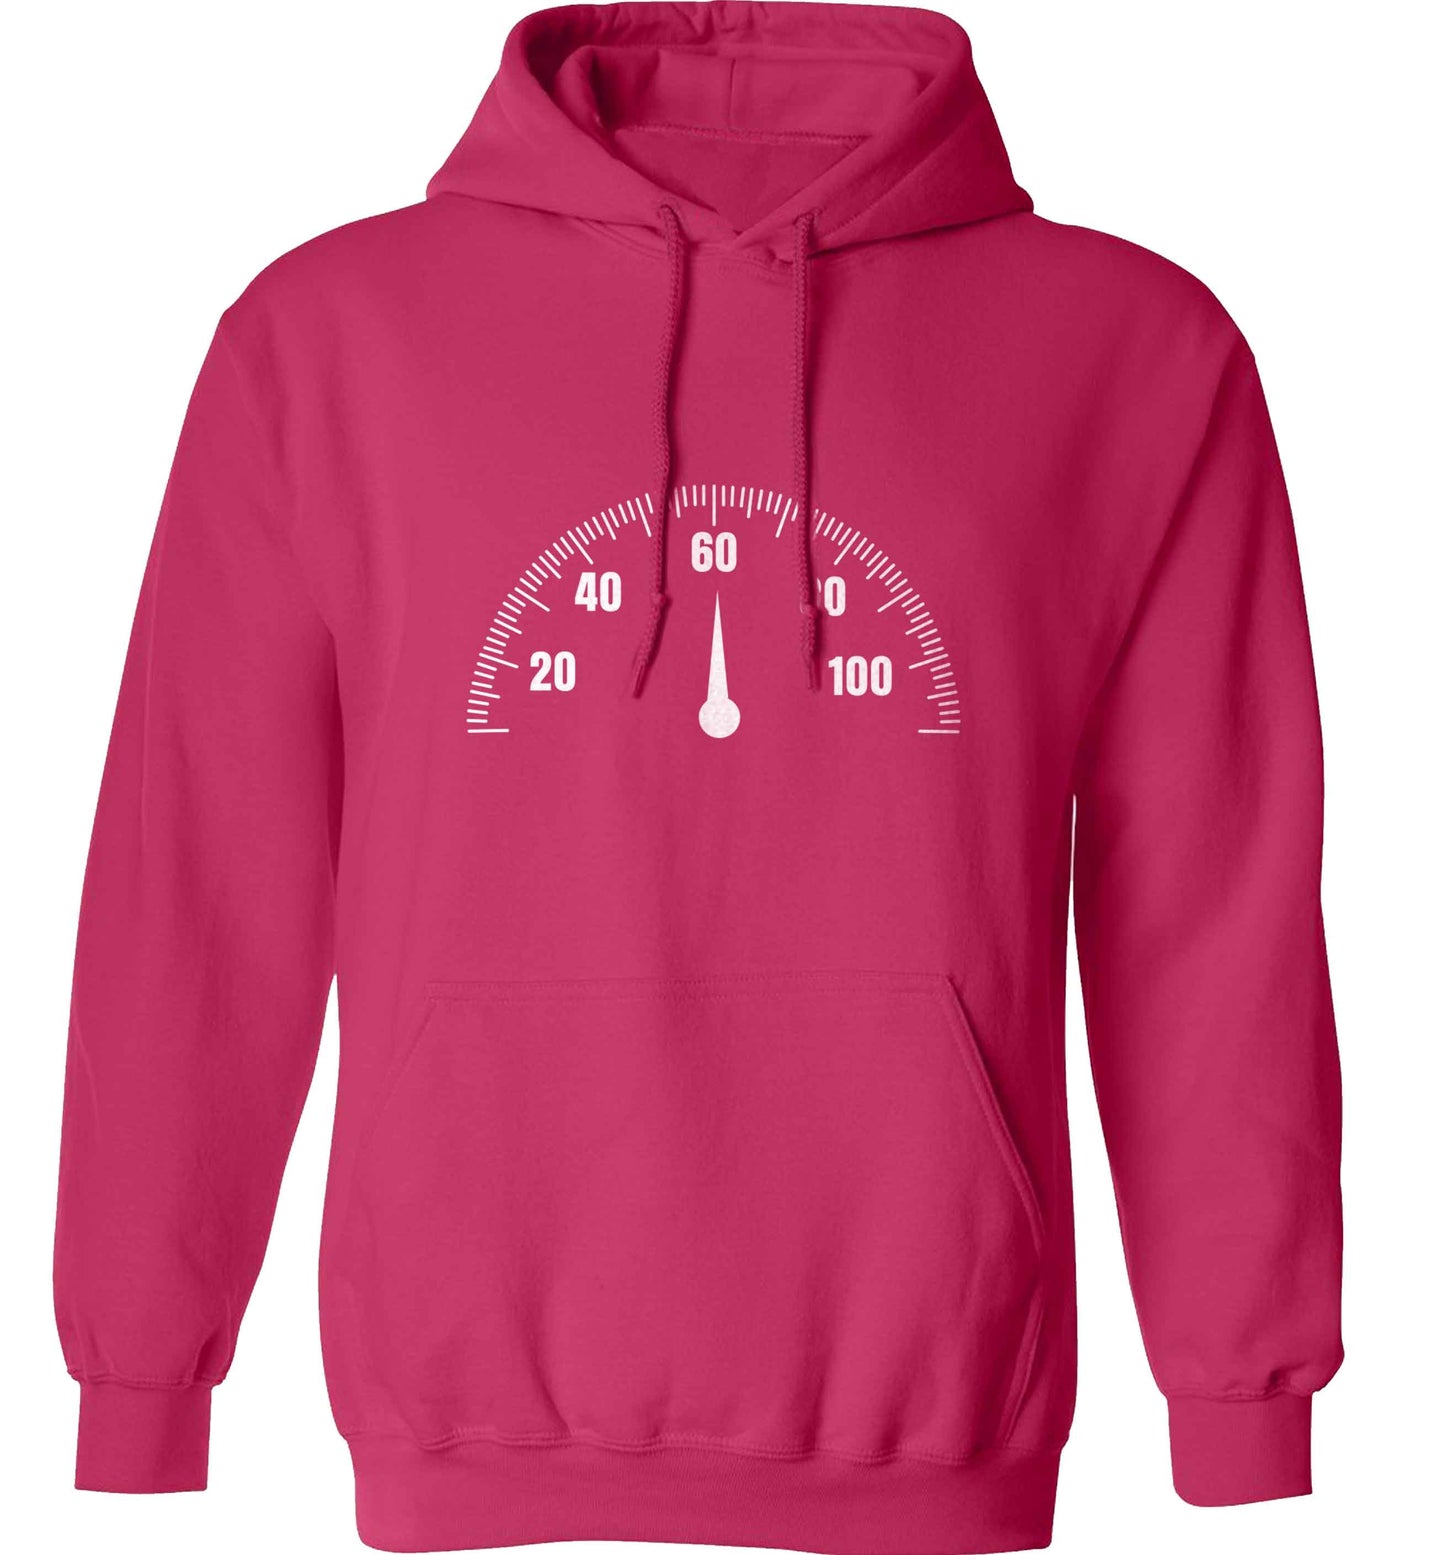 Speed dial 60 adults unisex pink hoodie 2XL